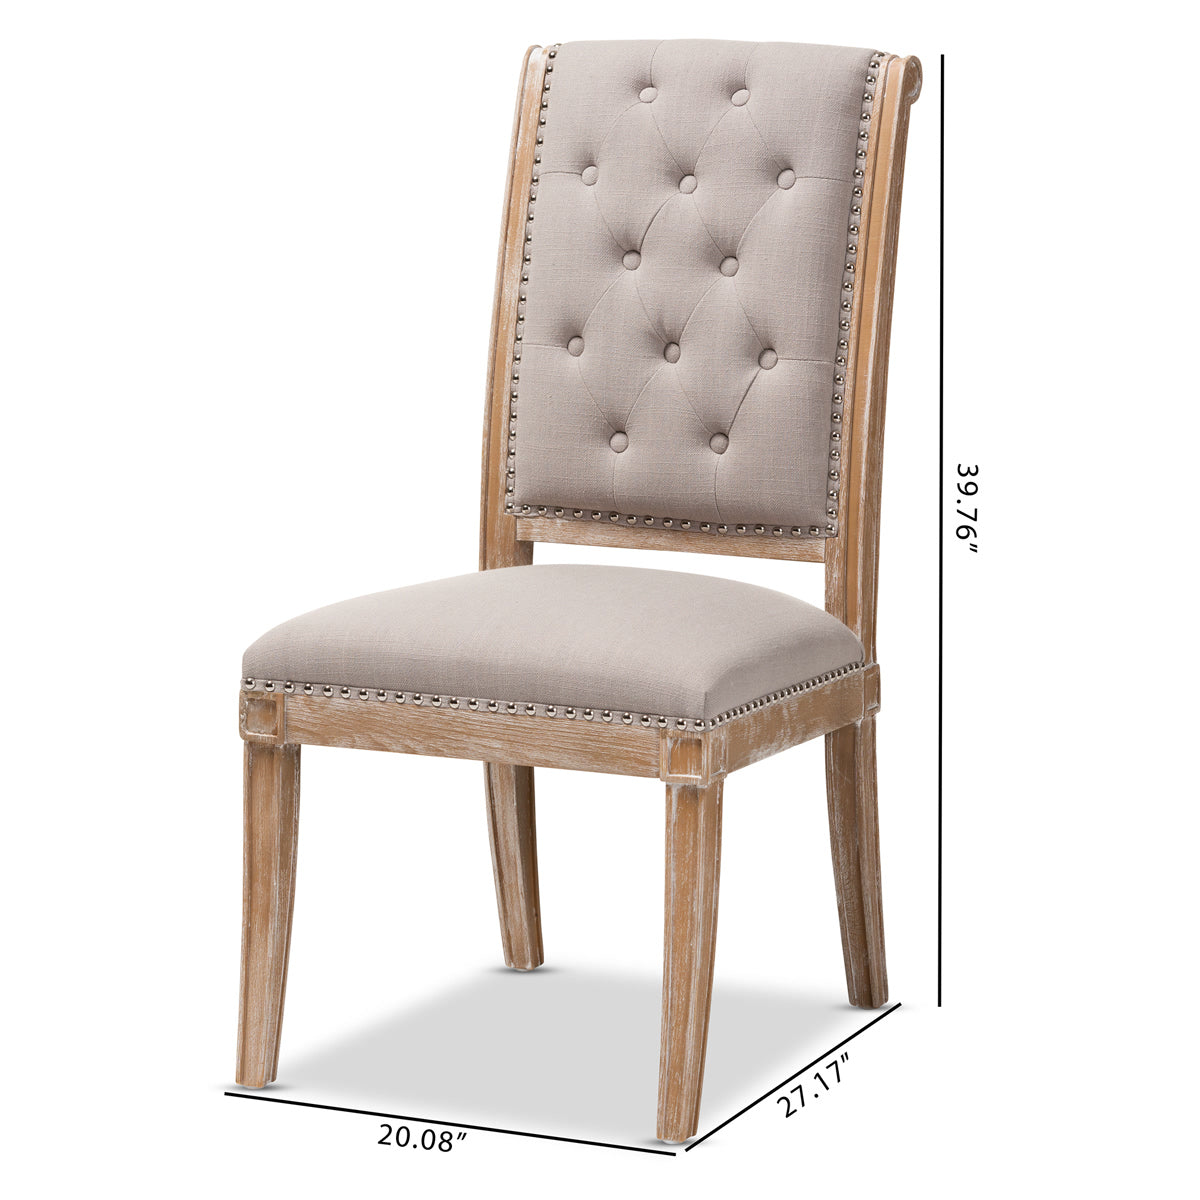 Baxton Studio Charmant French Provincial Beige Fabric Upholstered Weathered Oak Finished Wood Dining Chair Baxton Studio-dining chair-Minimal And Modern - 9